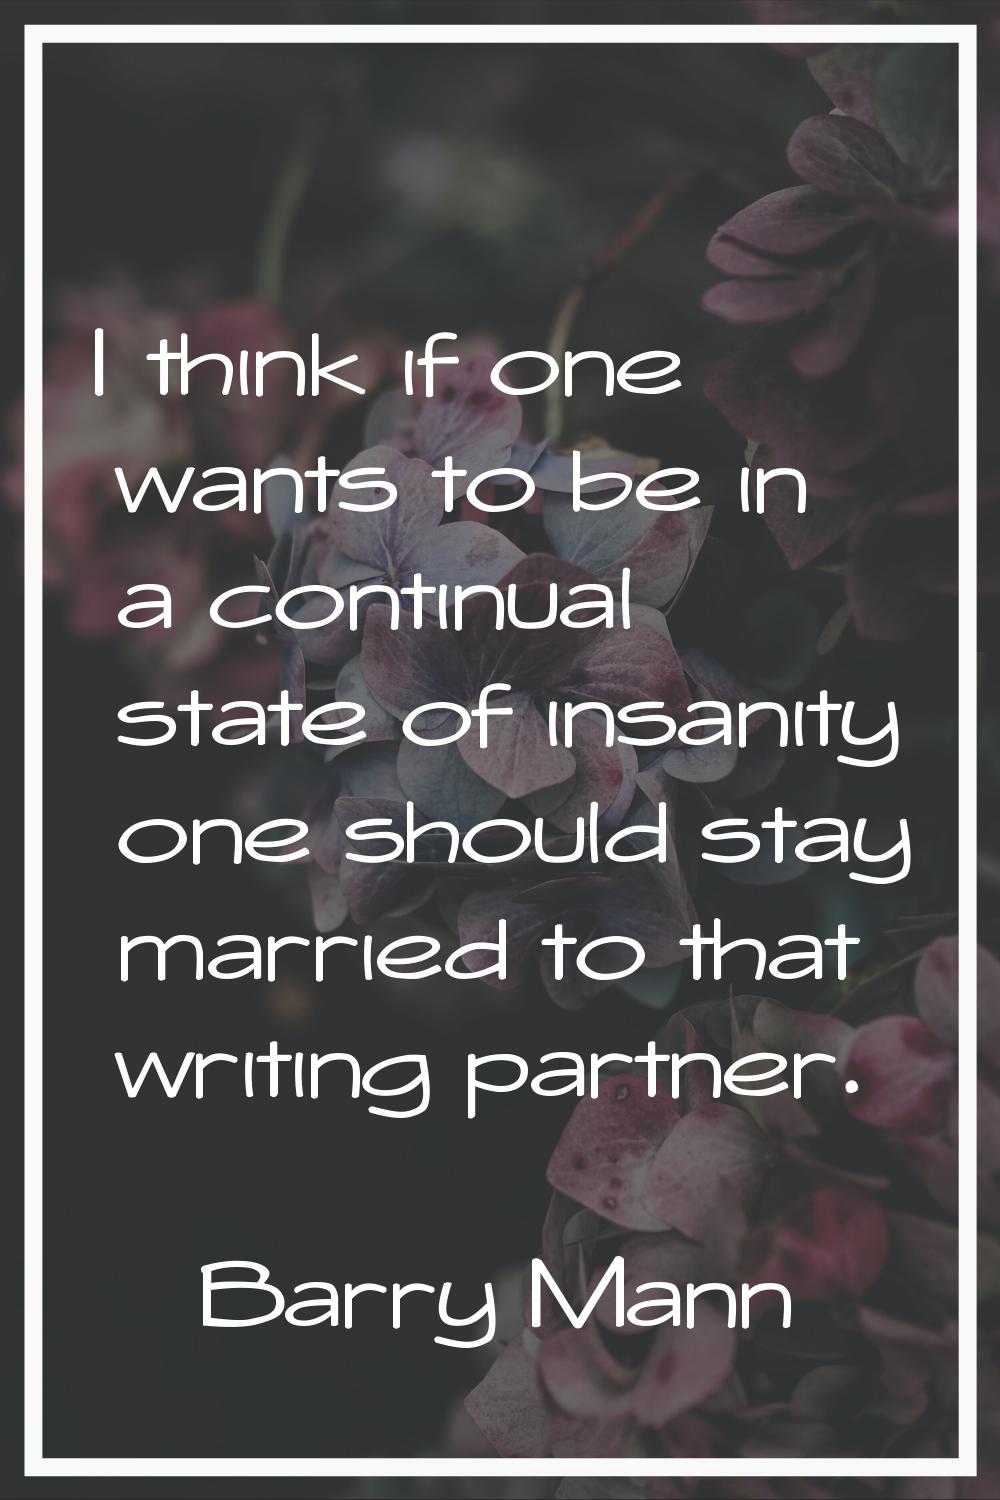 I think if one wants to be in a continual state of insanity one should stay married to that writing